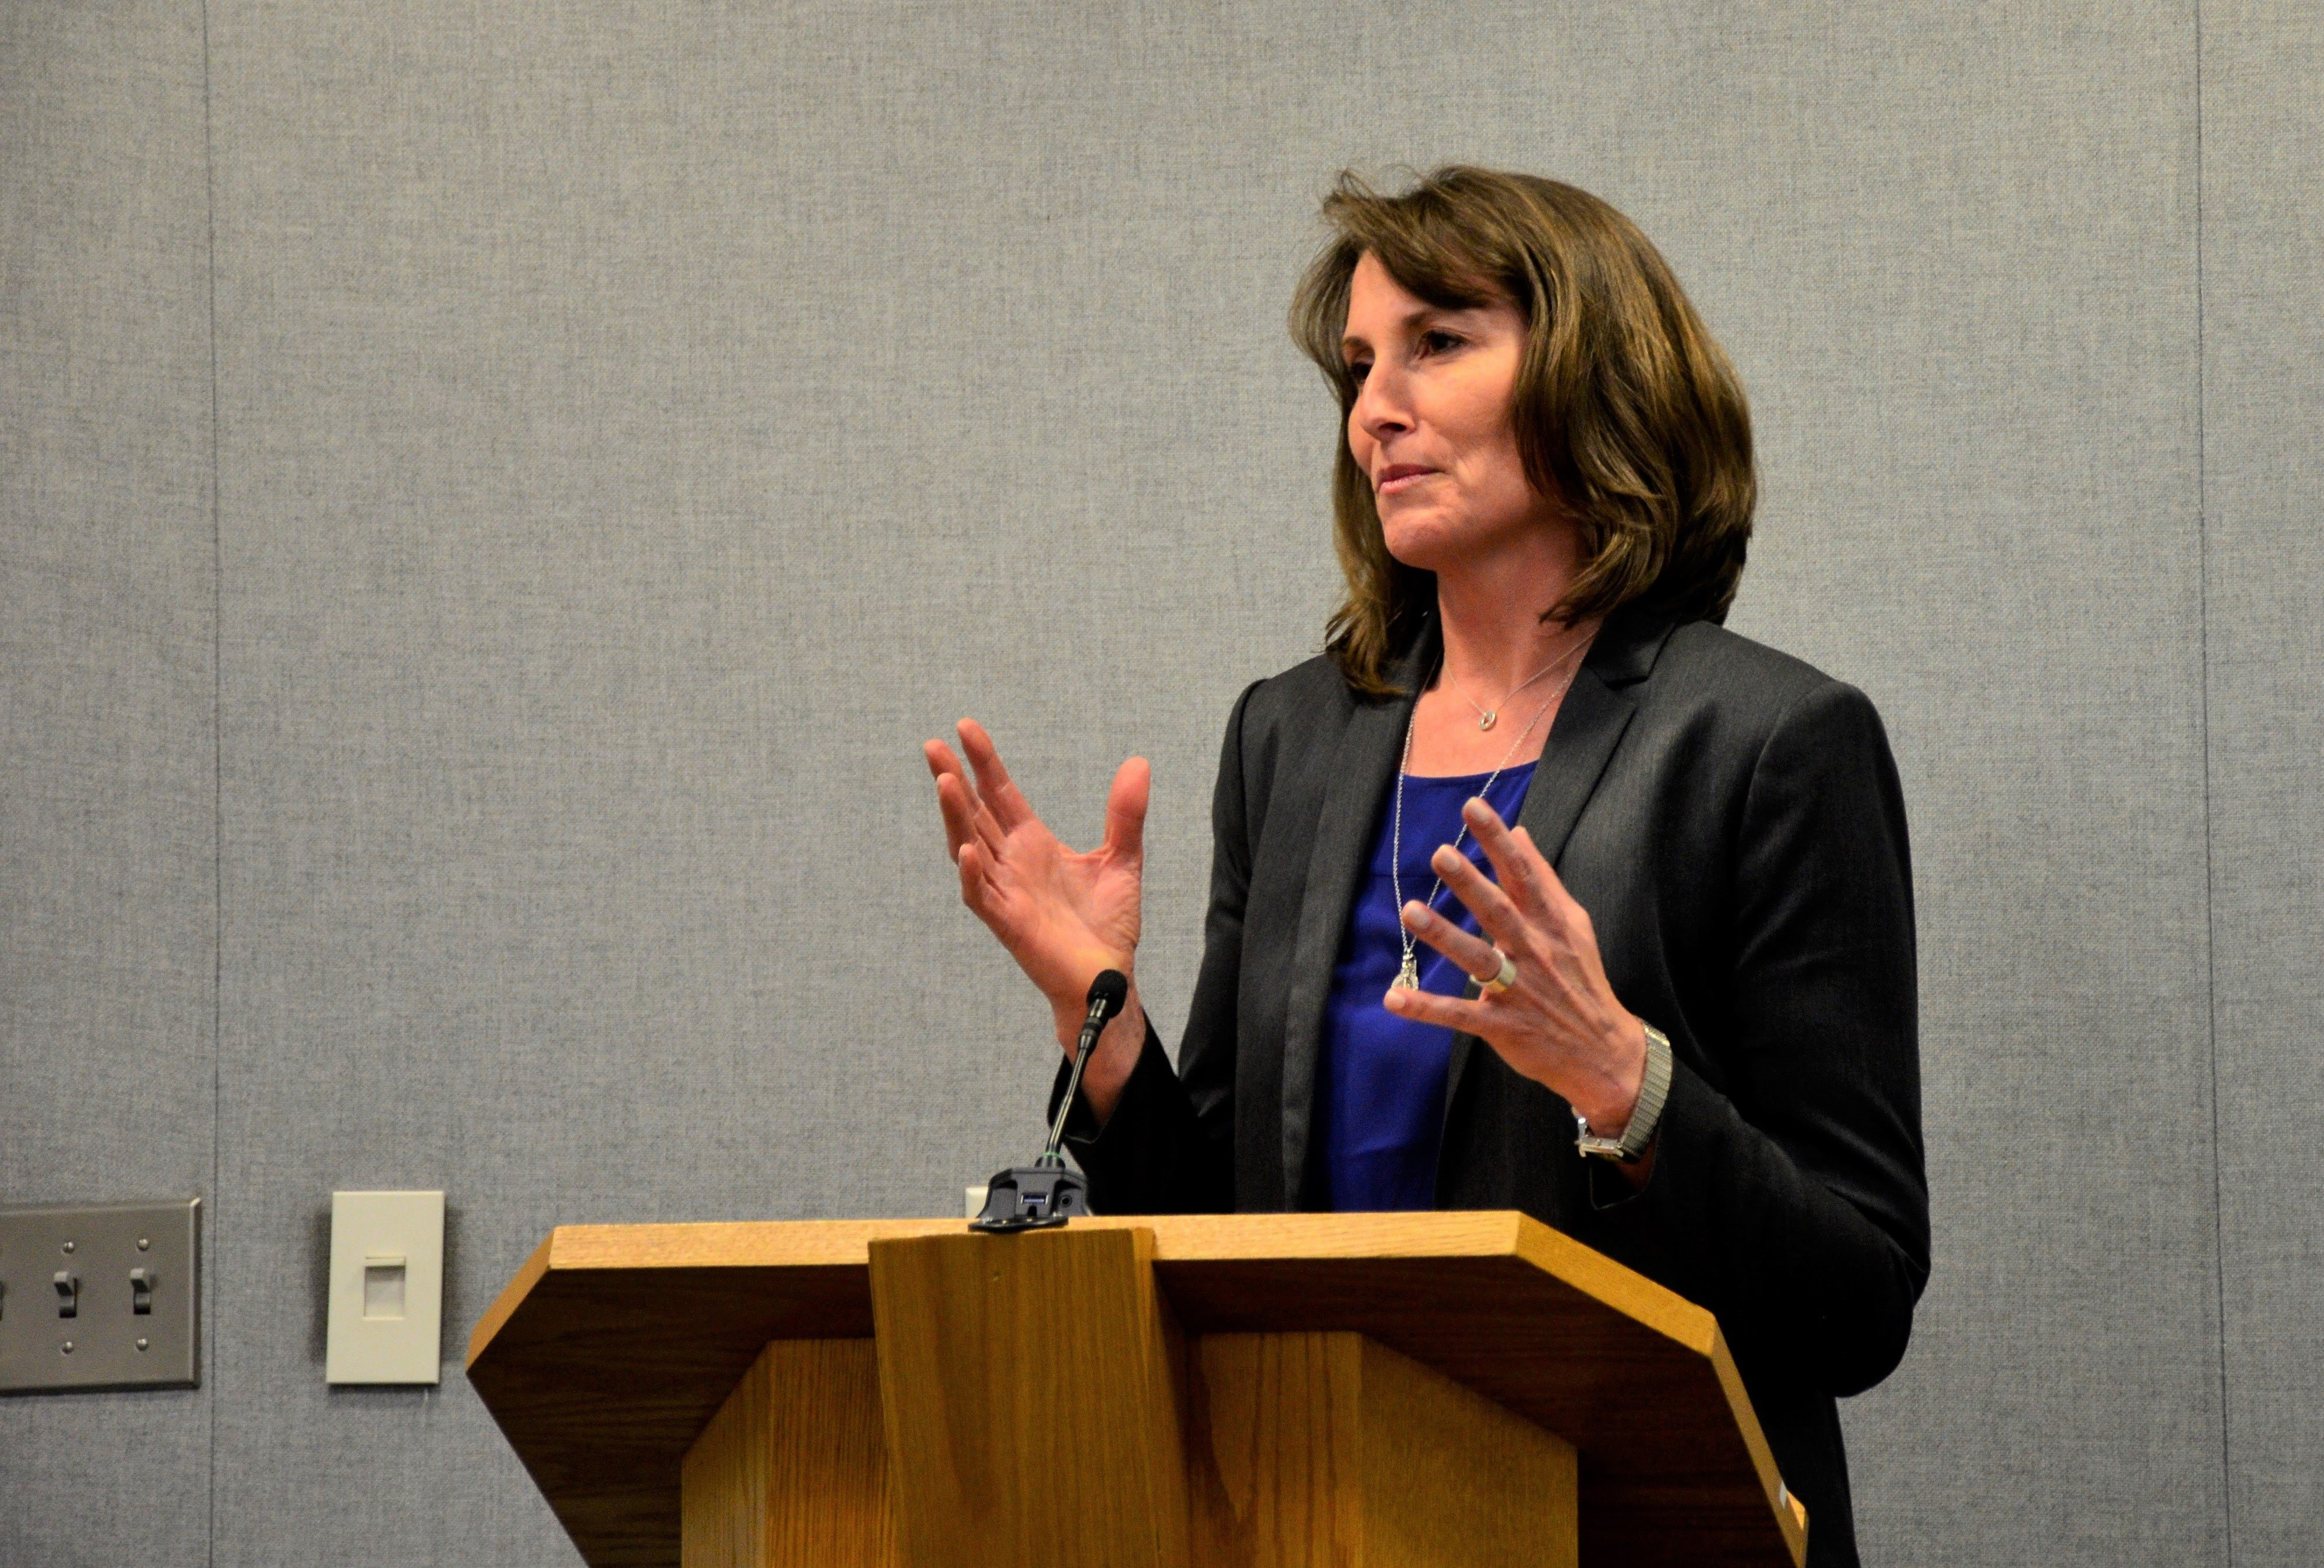 TCUSD concludes superintendent search